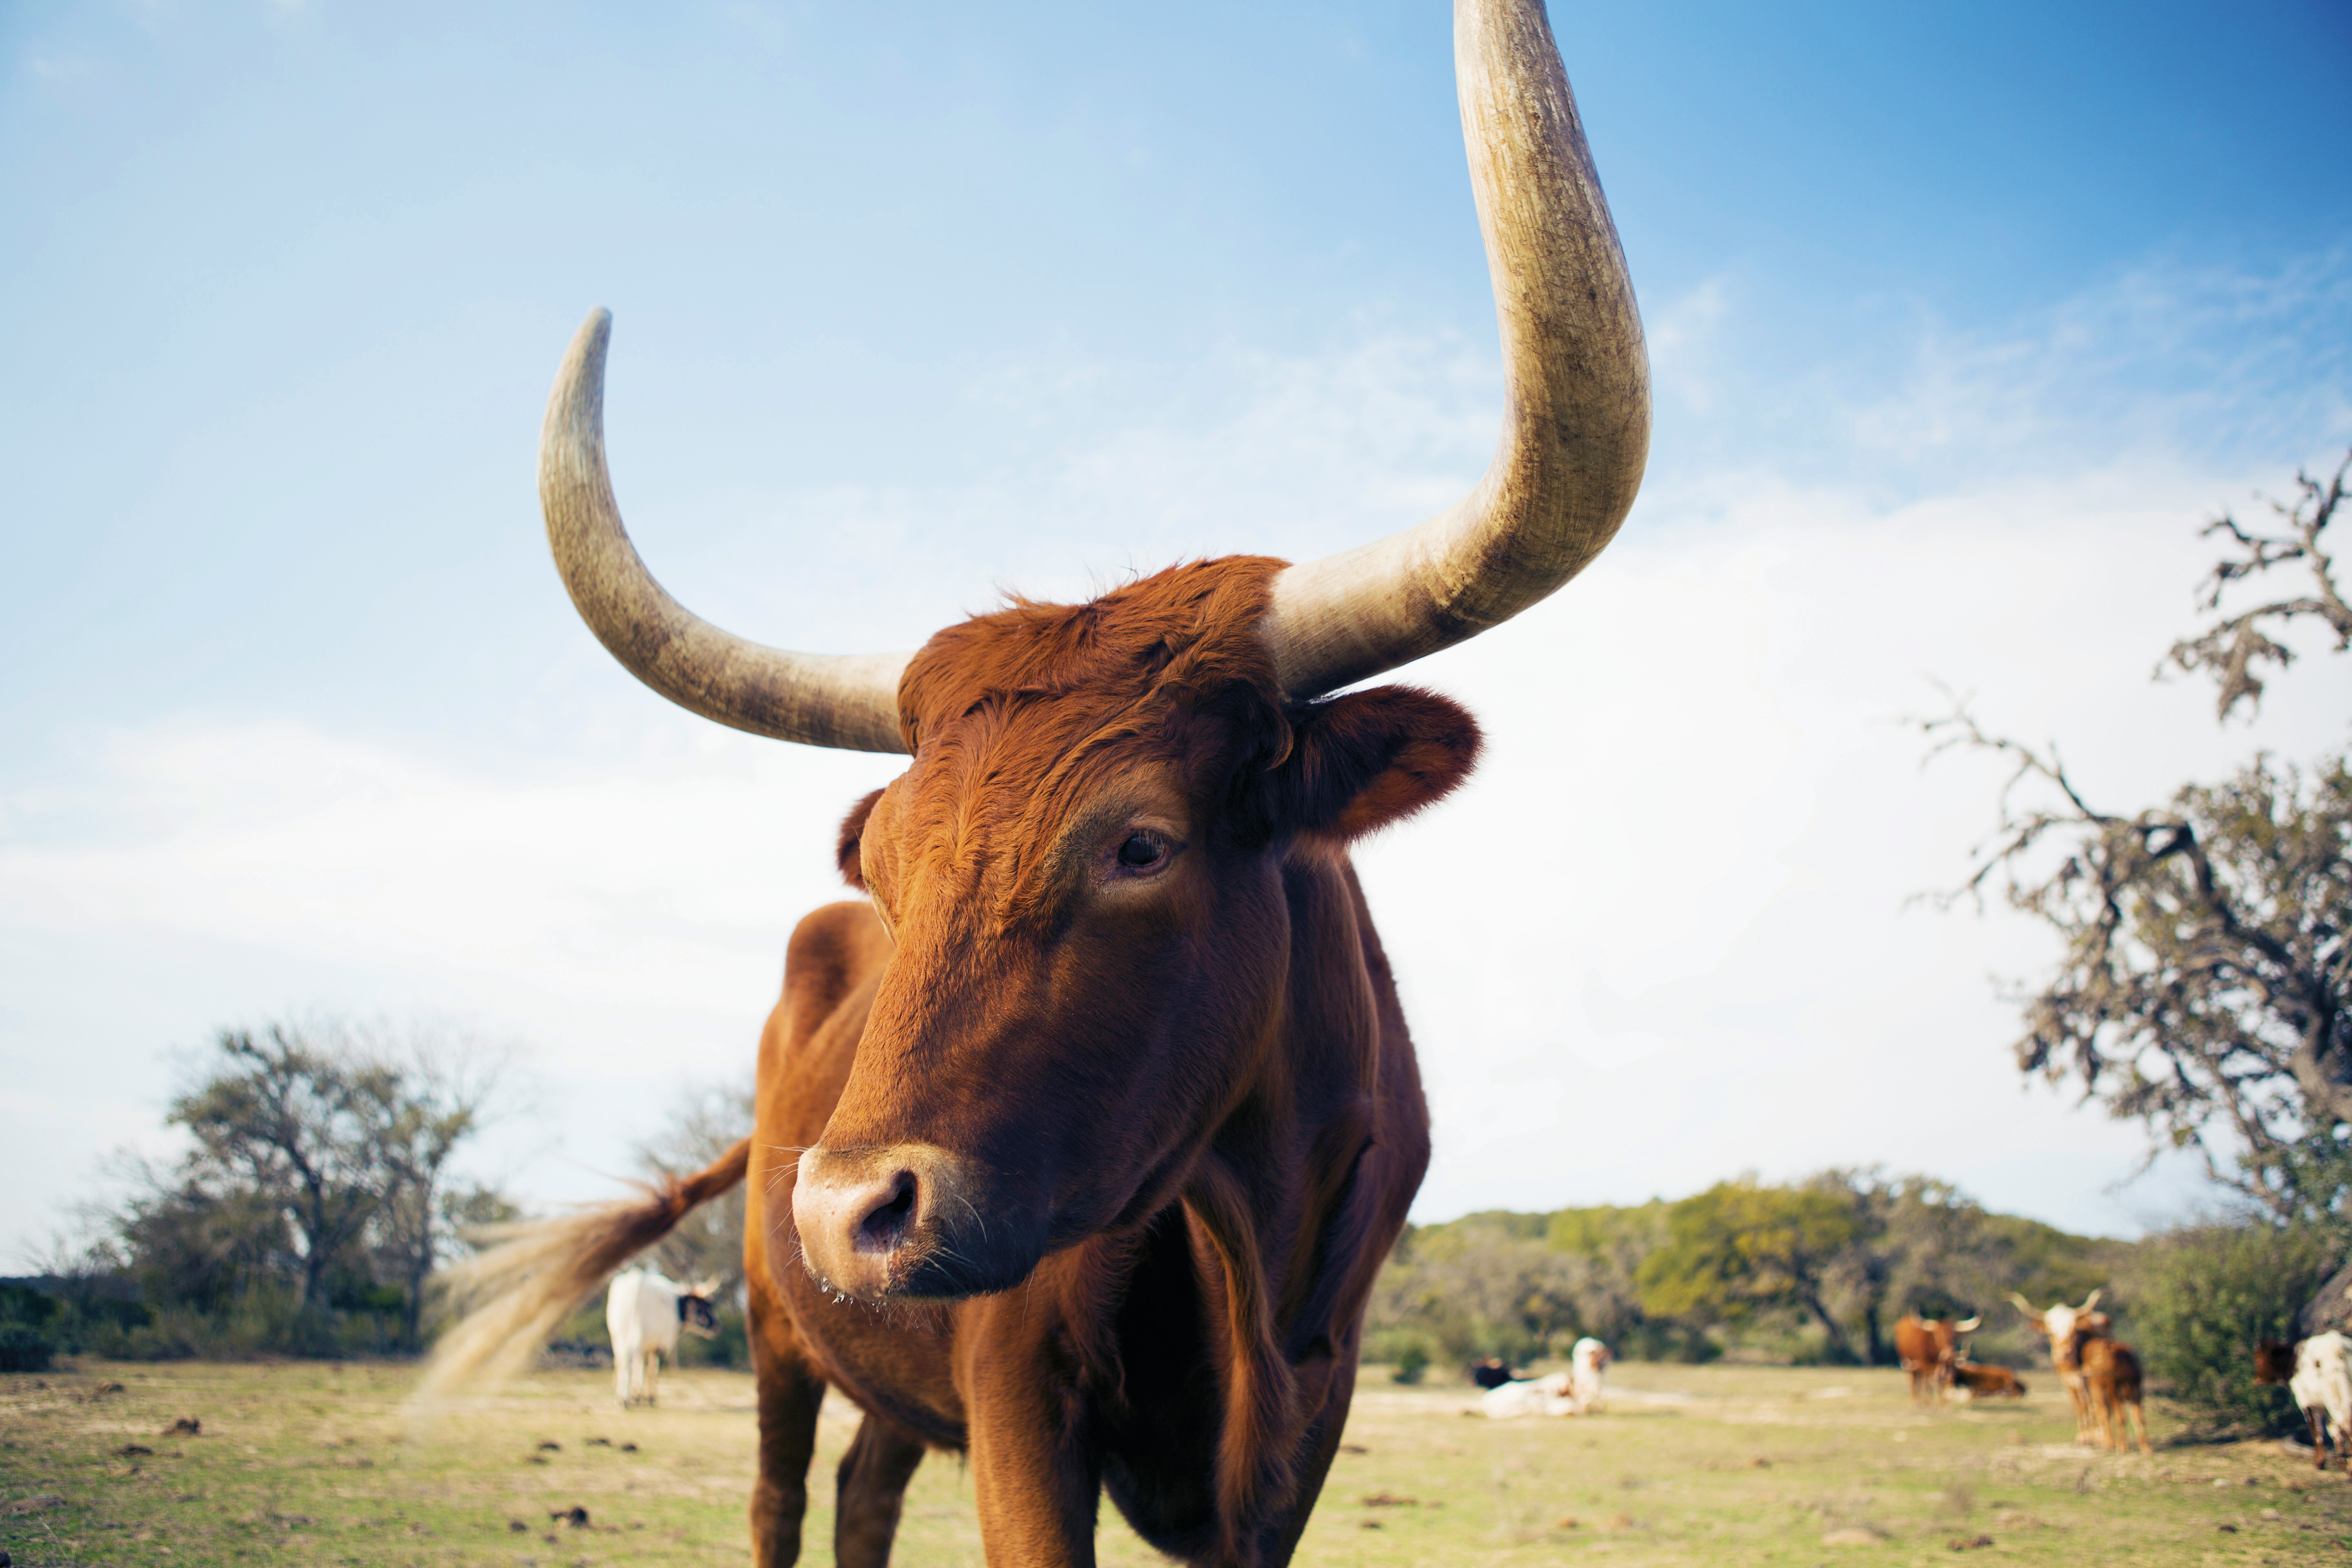 A close-up of a large brown cow with horns. Several other cows are in the field behind